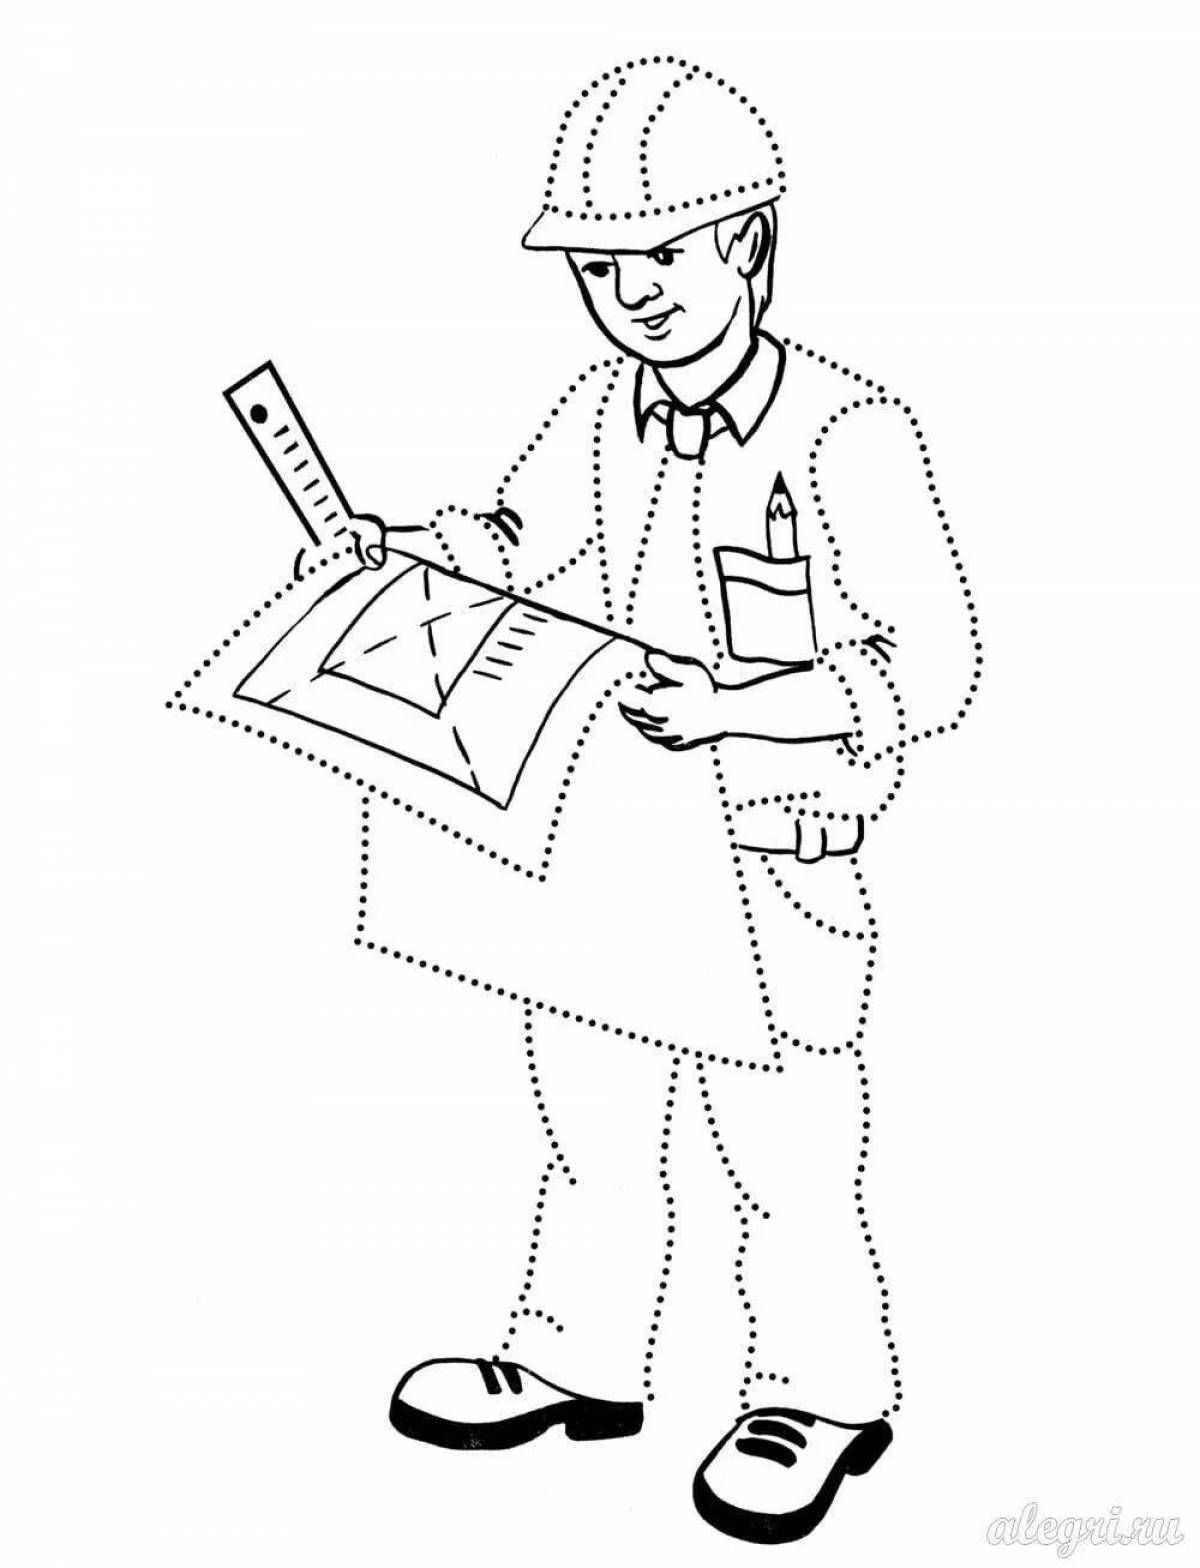 Creative architect coloring book for kids